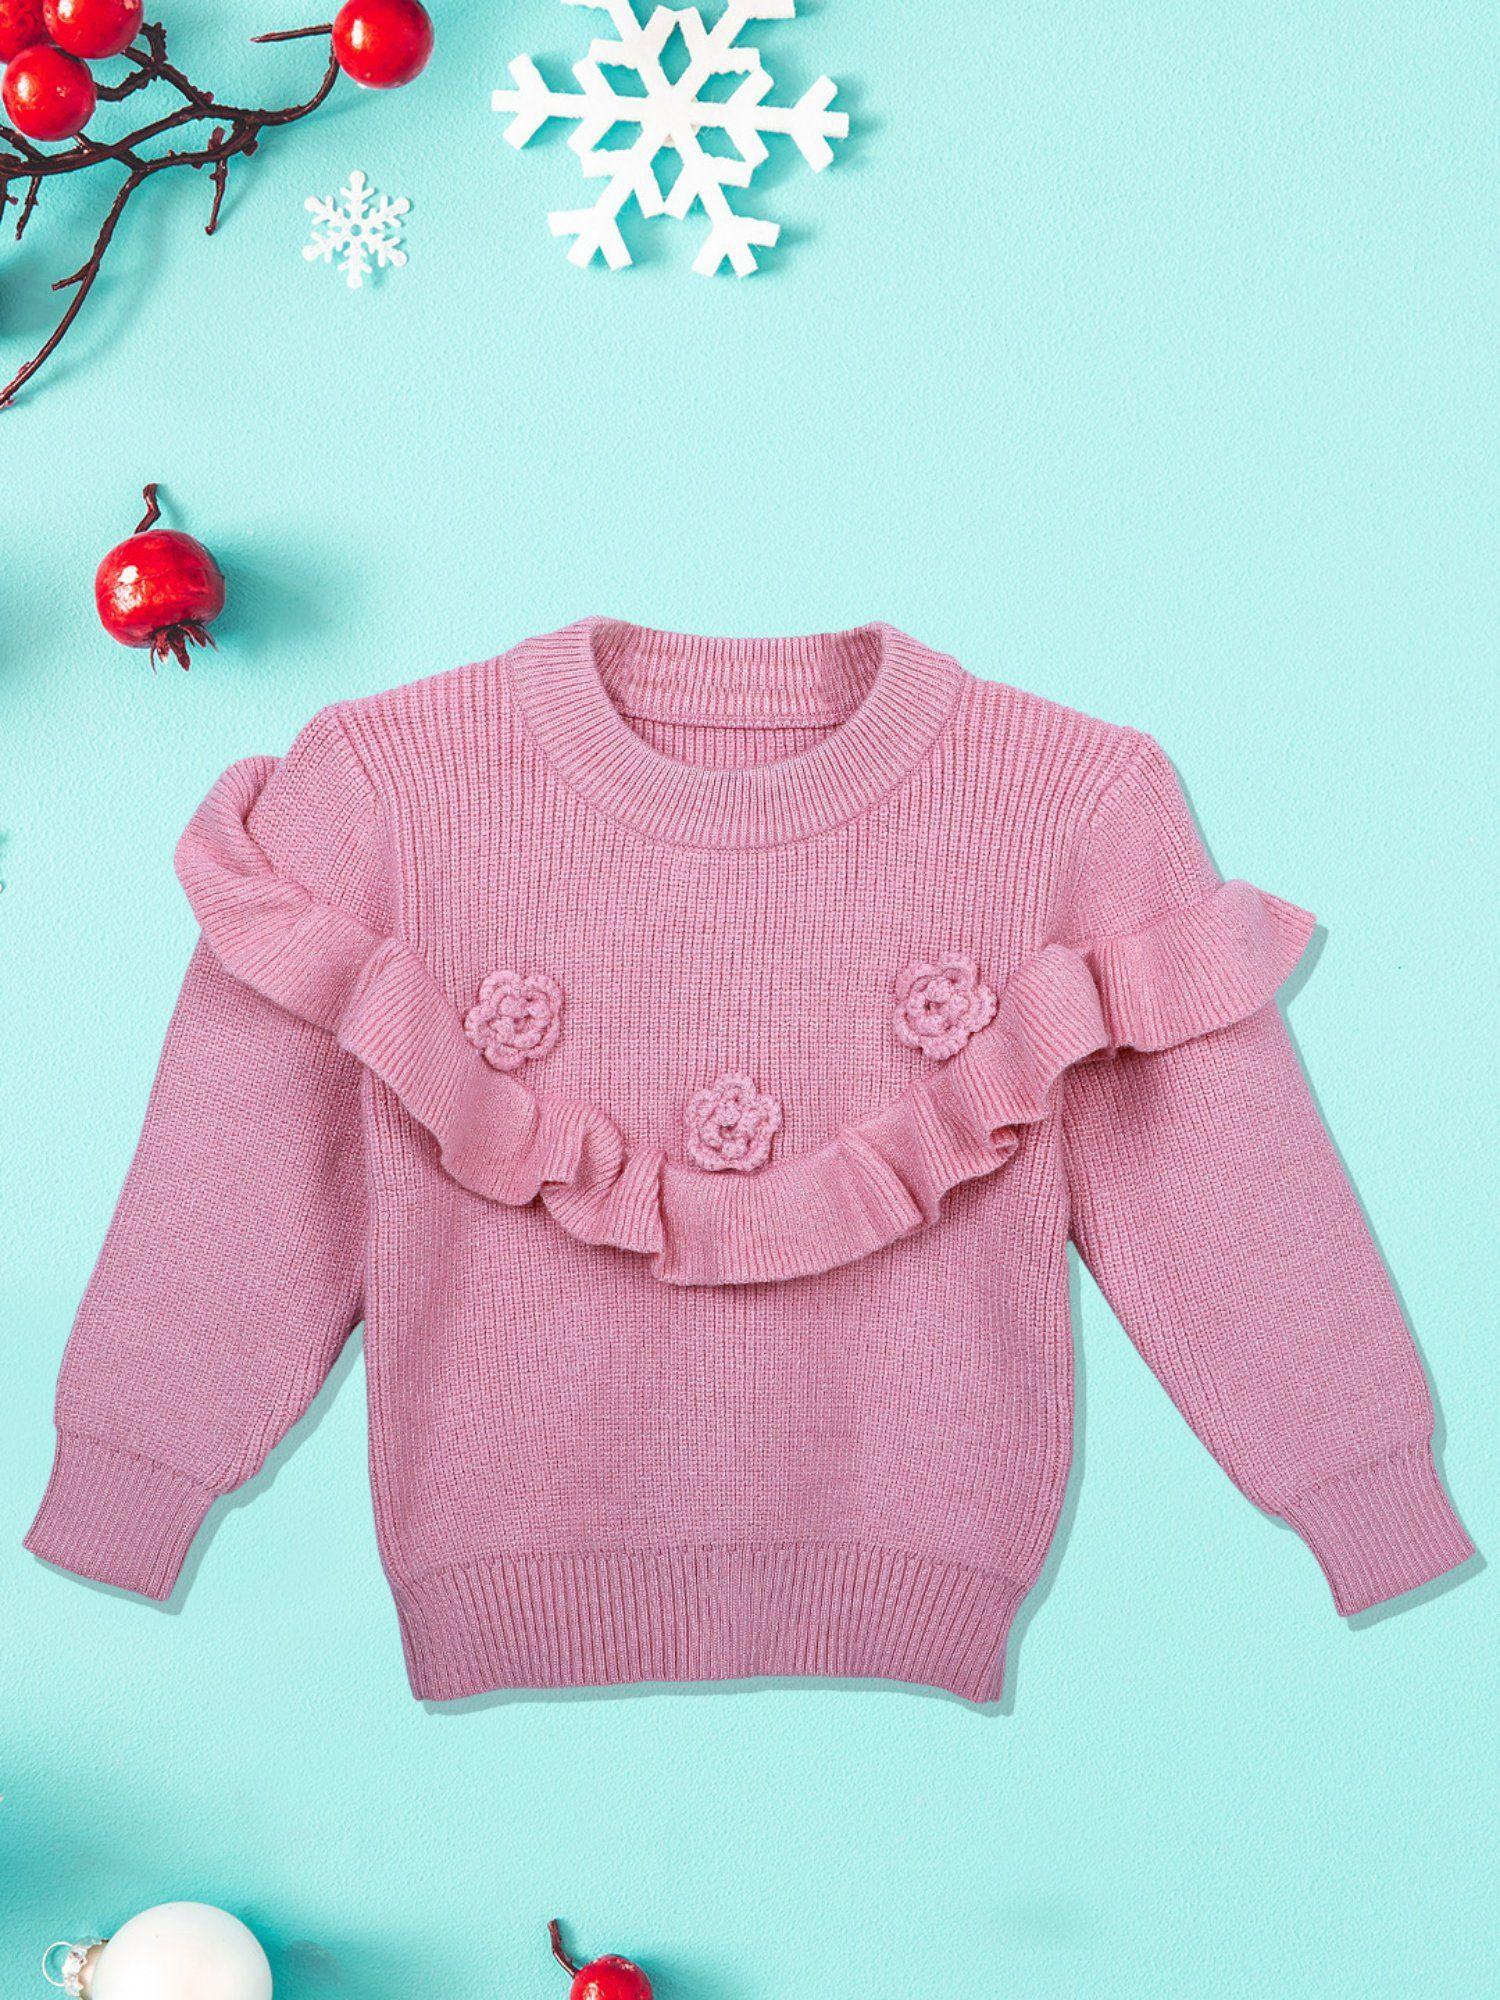 Flowers and Frills Premium Full Sleeves Knitted Sweater Pink